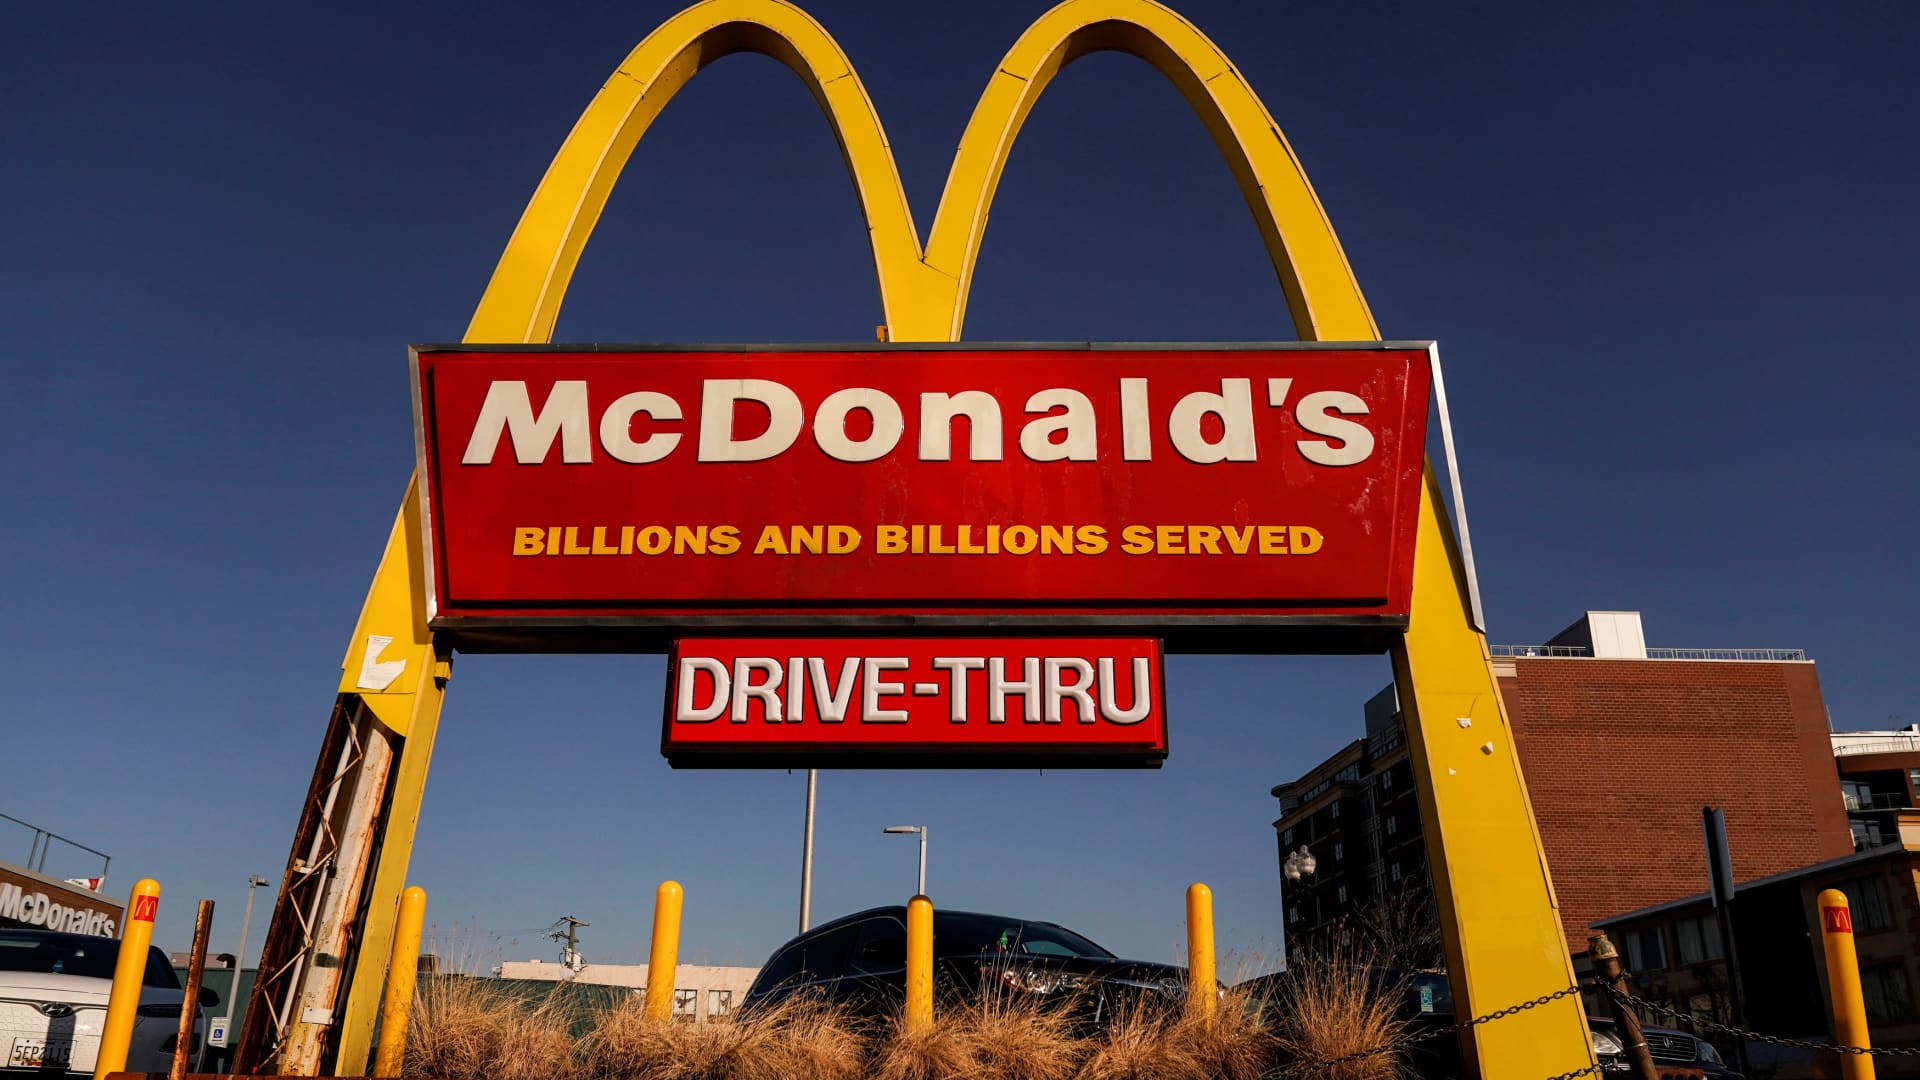 McDonald’s simplifies franchising policies to attract more diverse candidates